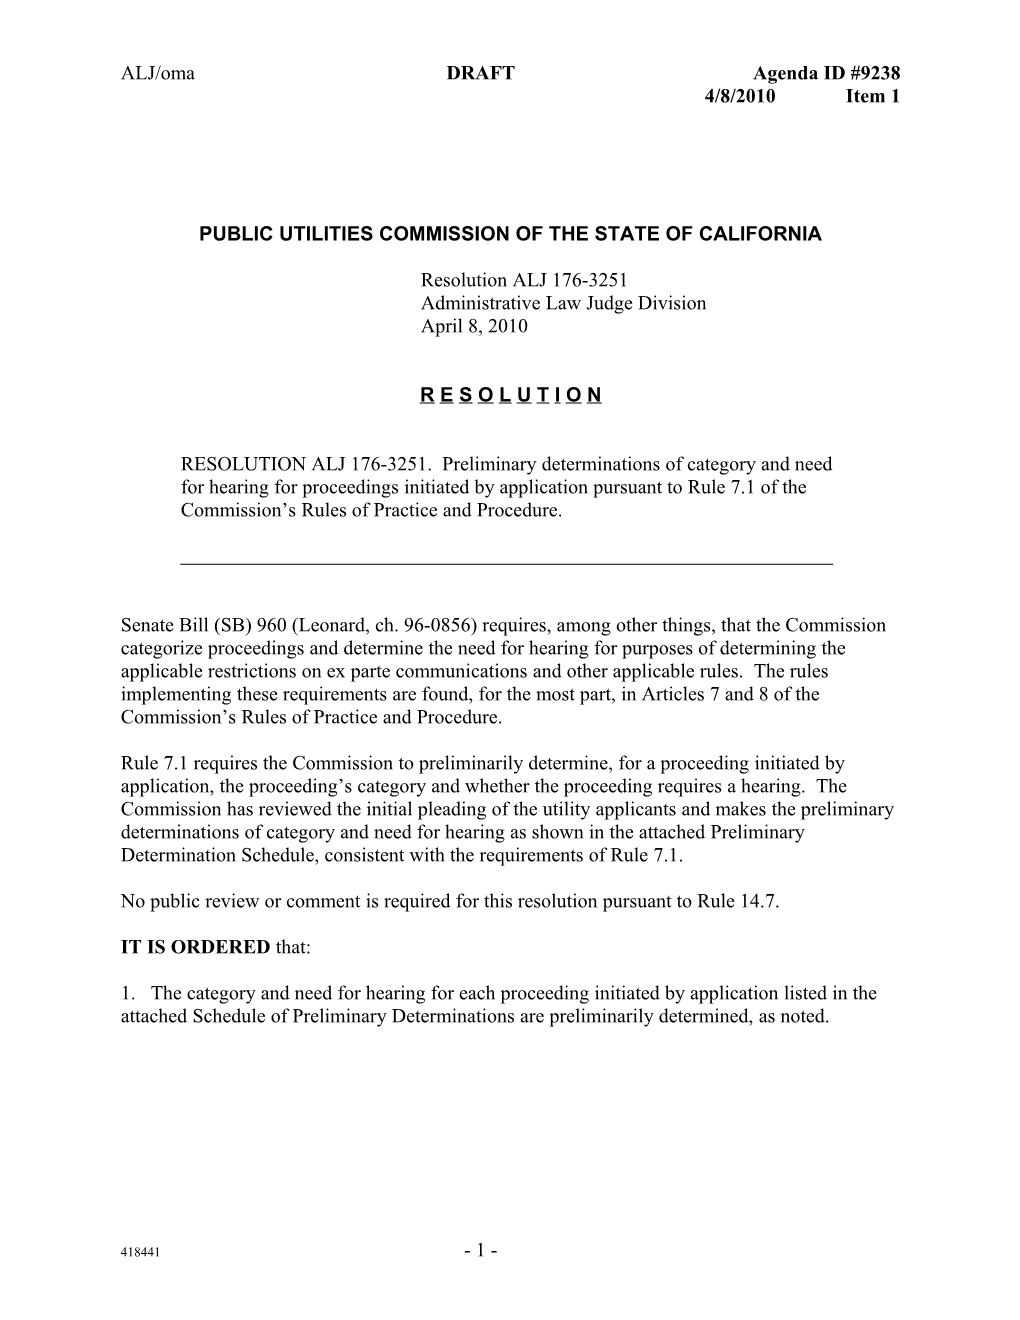 Public Utilities Commission of the State of California s28